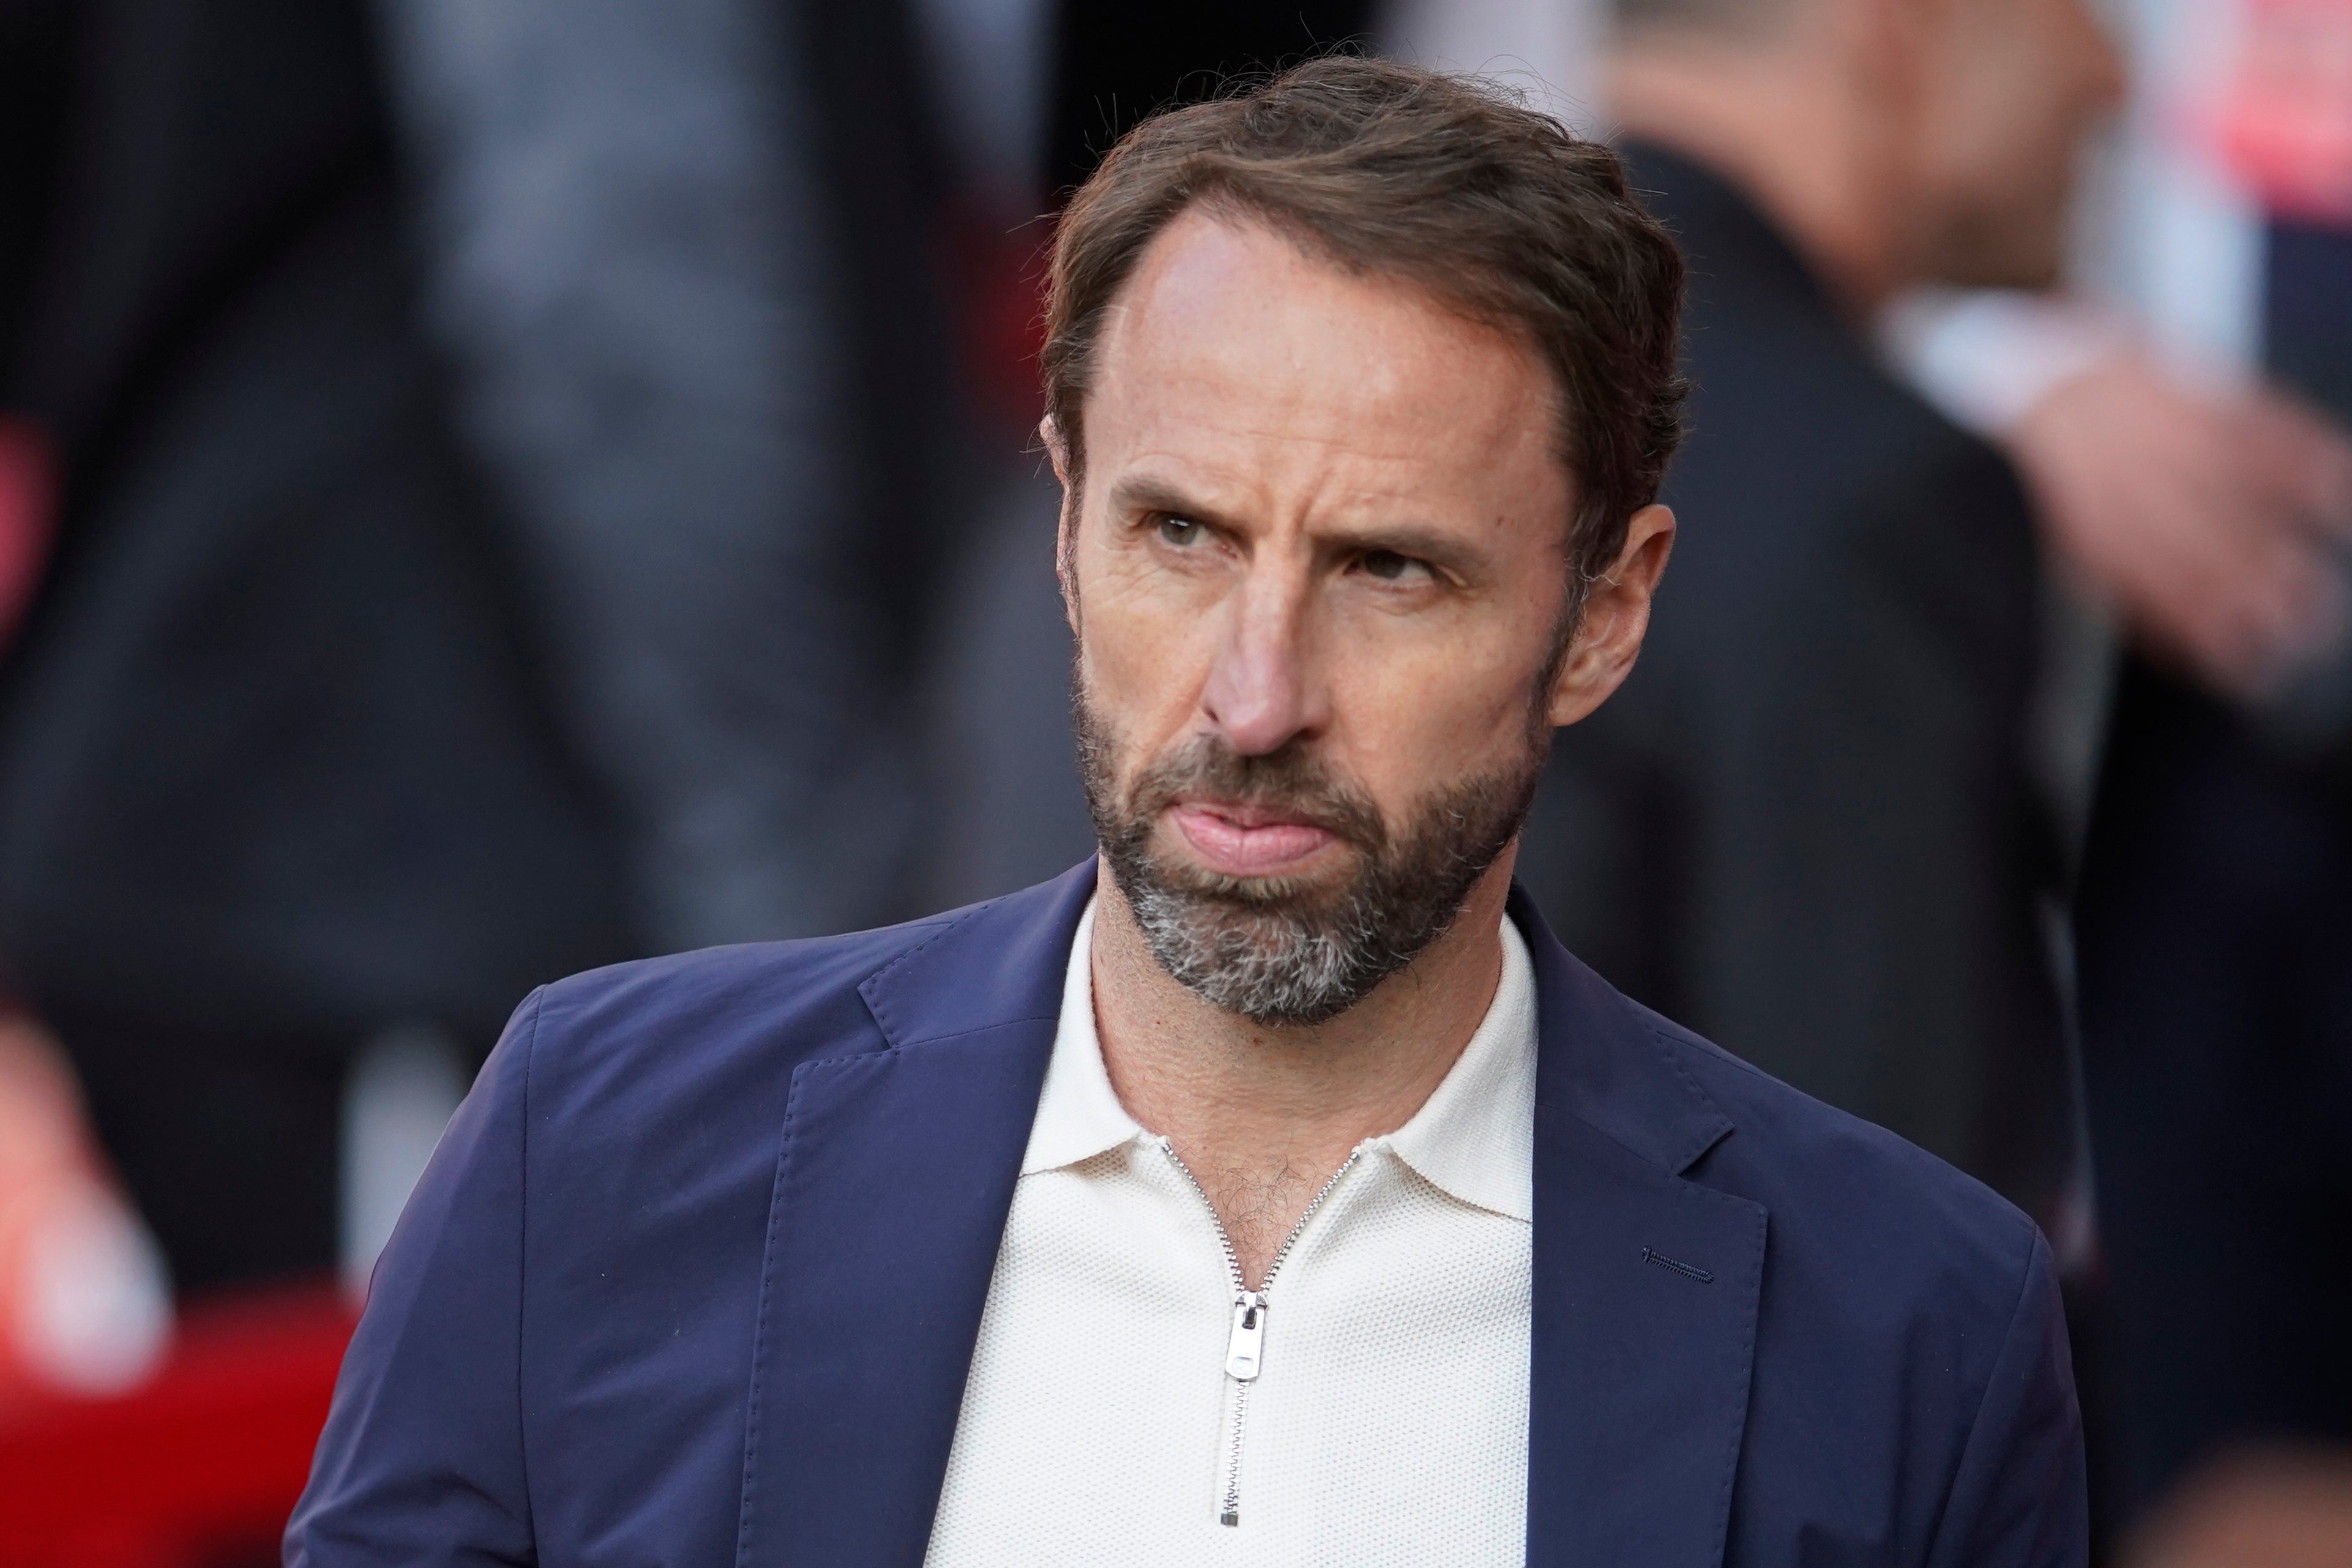 Gareth Southgate hinted he could stay on beyond the Euros